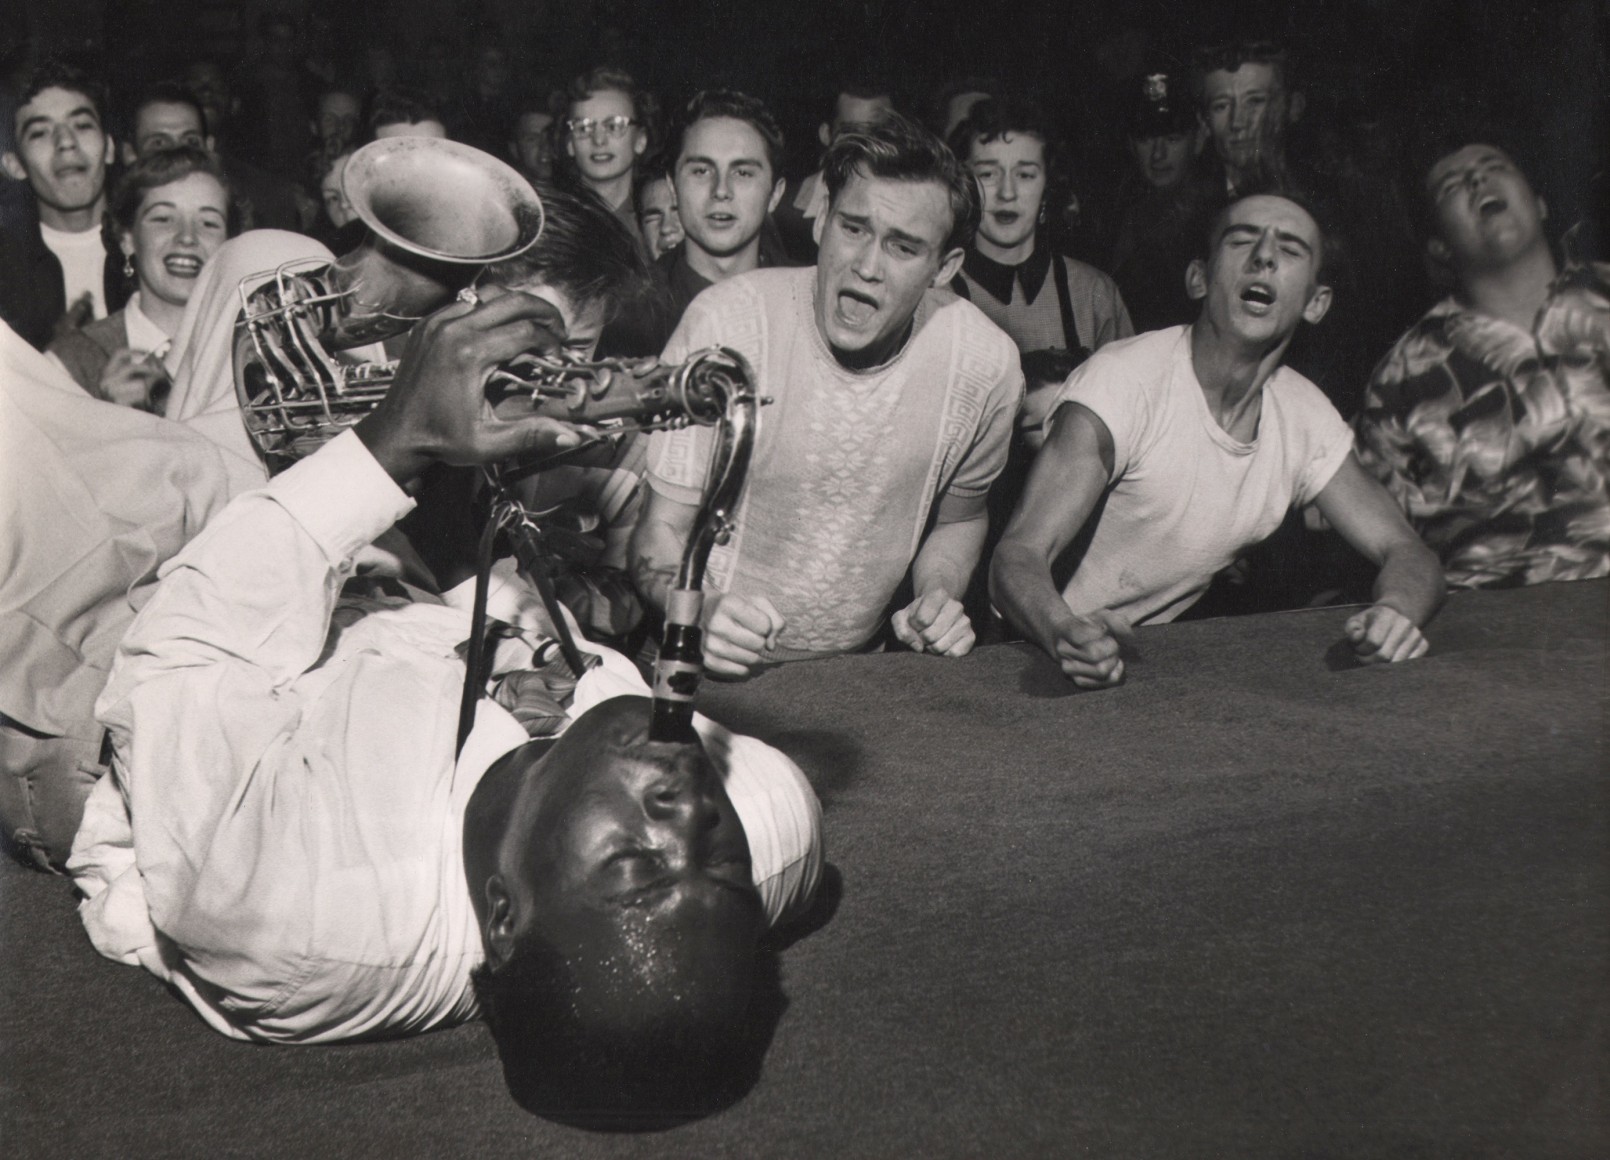 Bob Willoughby, Big Jay McNeely, ​1951. Subject lays on stage mid-performance, playing the saxophone while emotional fans look on.